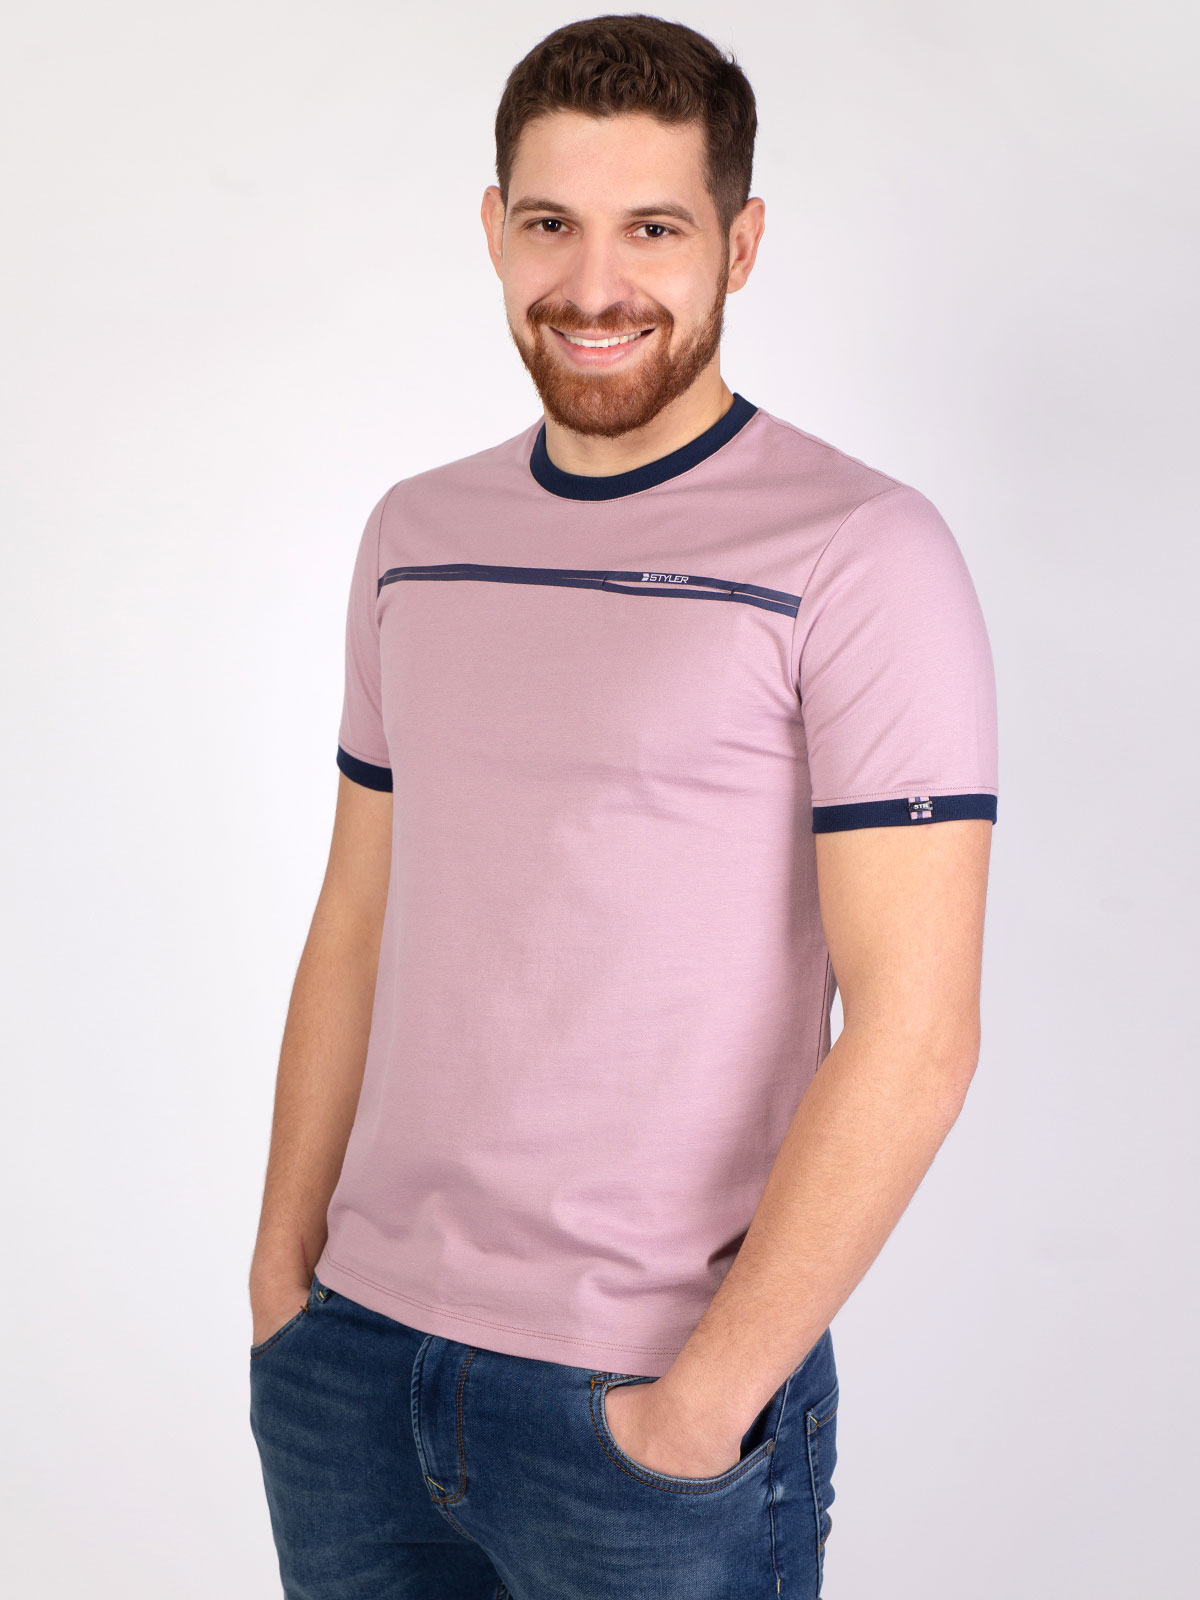 Tshirt in light purple with blue accent - 96390 € 12.37 img3